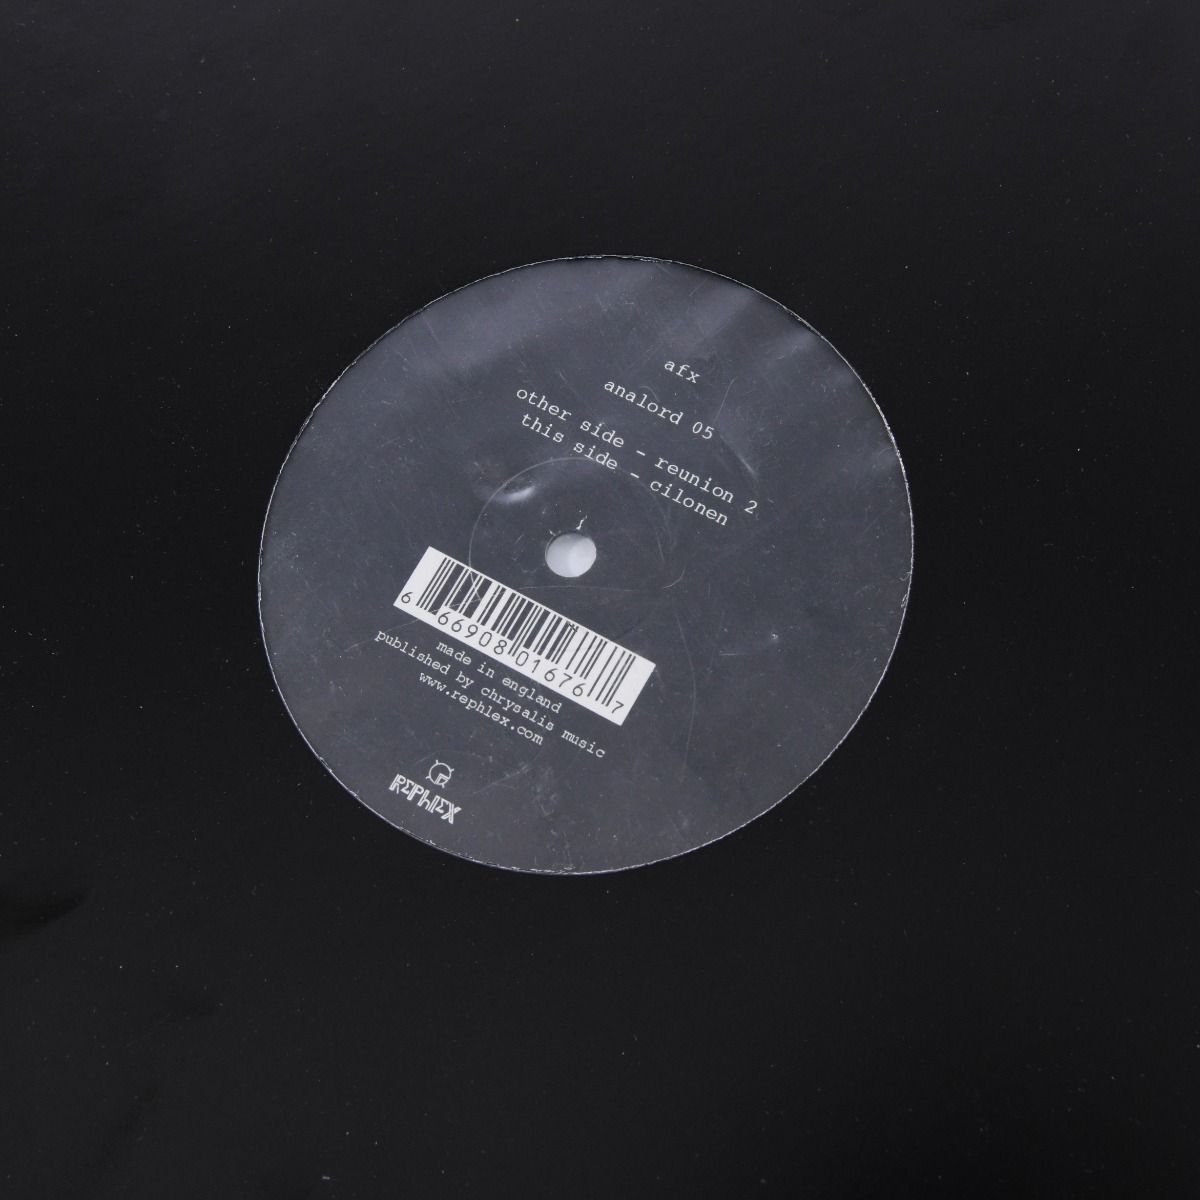 AFX - Analord 05 12"